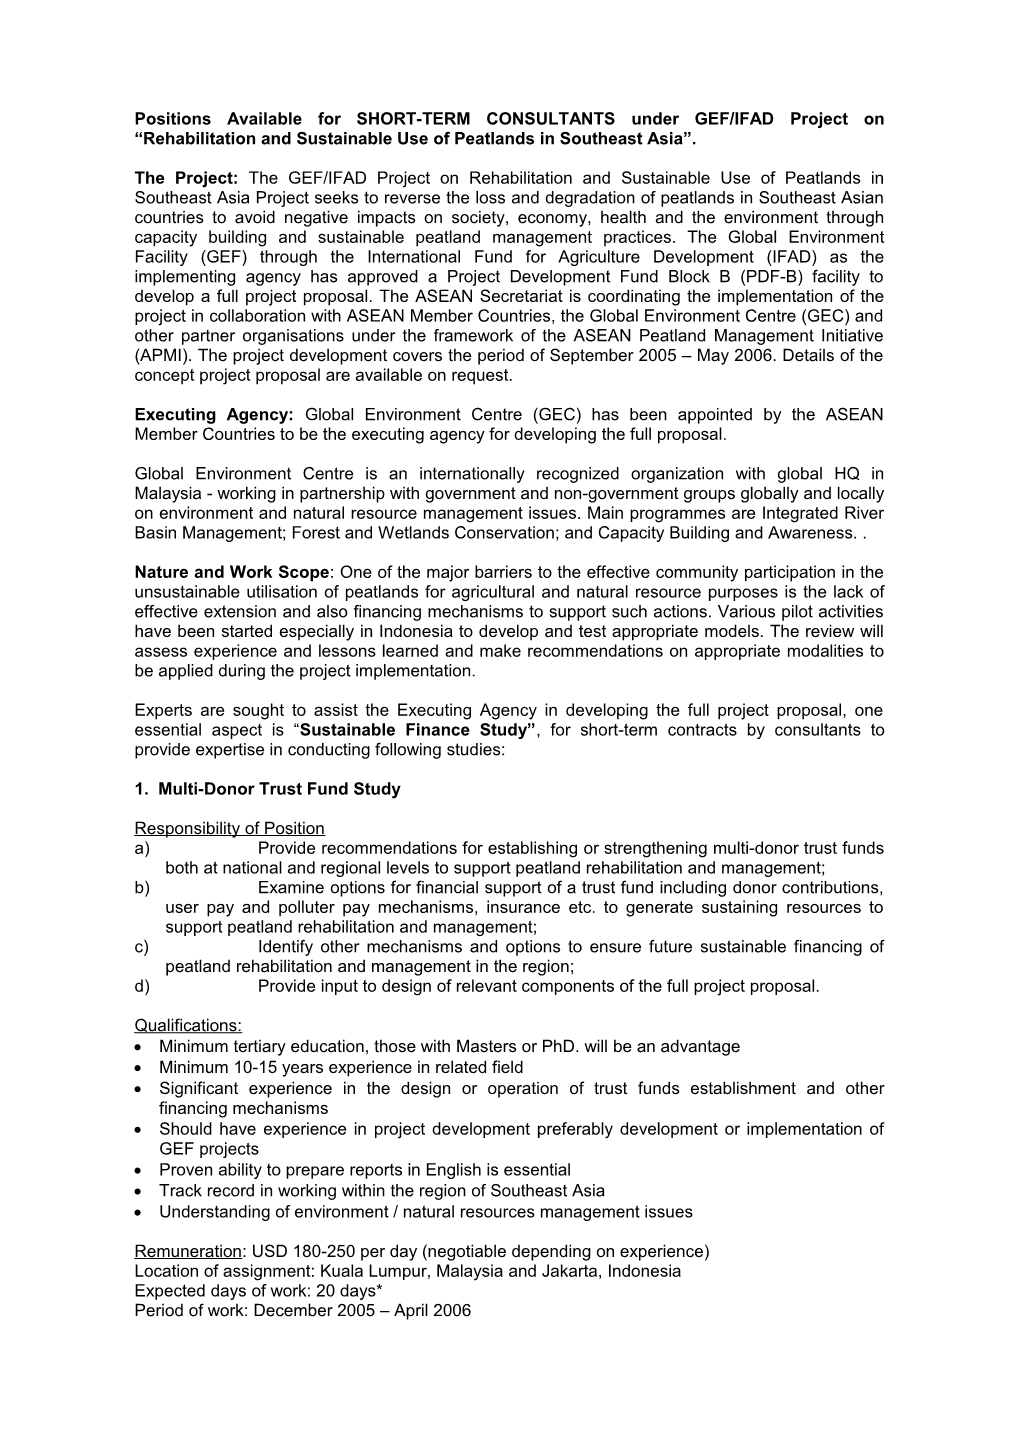 HIRING of CONSULTANTS: GEF/IFAD Project on Rehabilitation and Sustainable Use of Peatlands